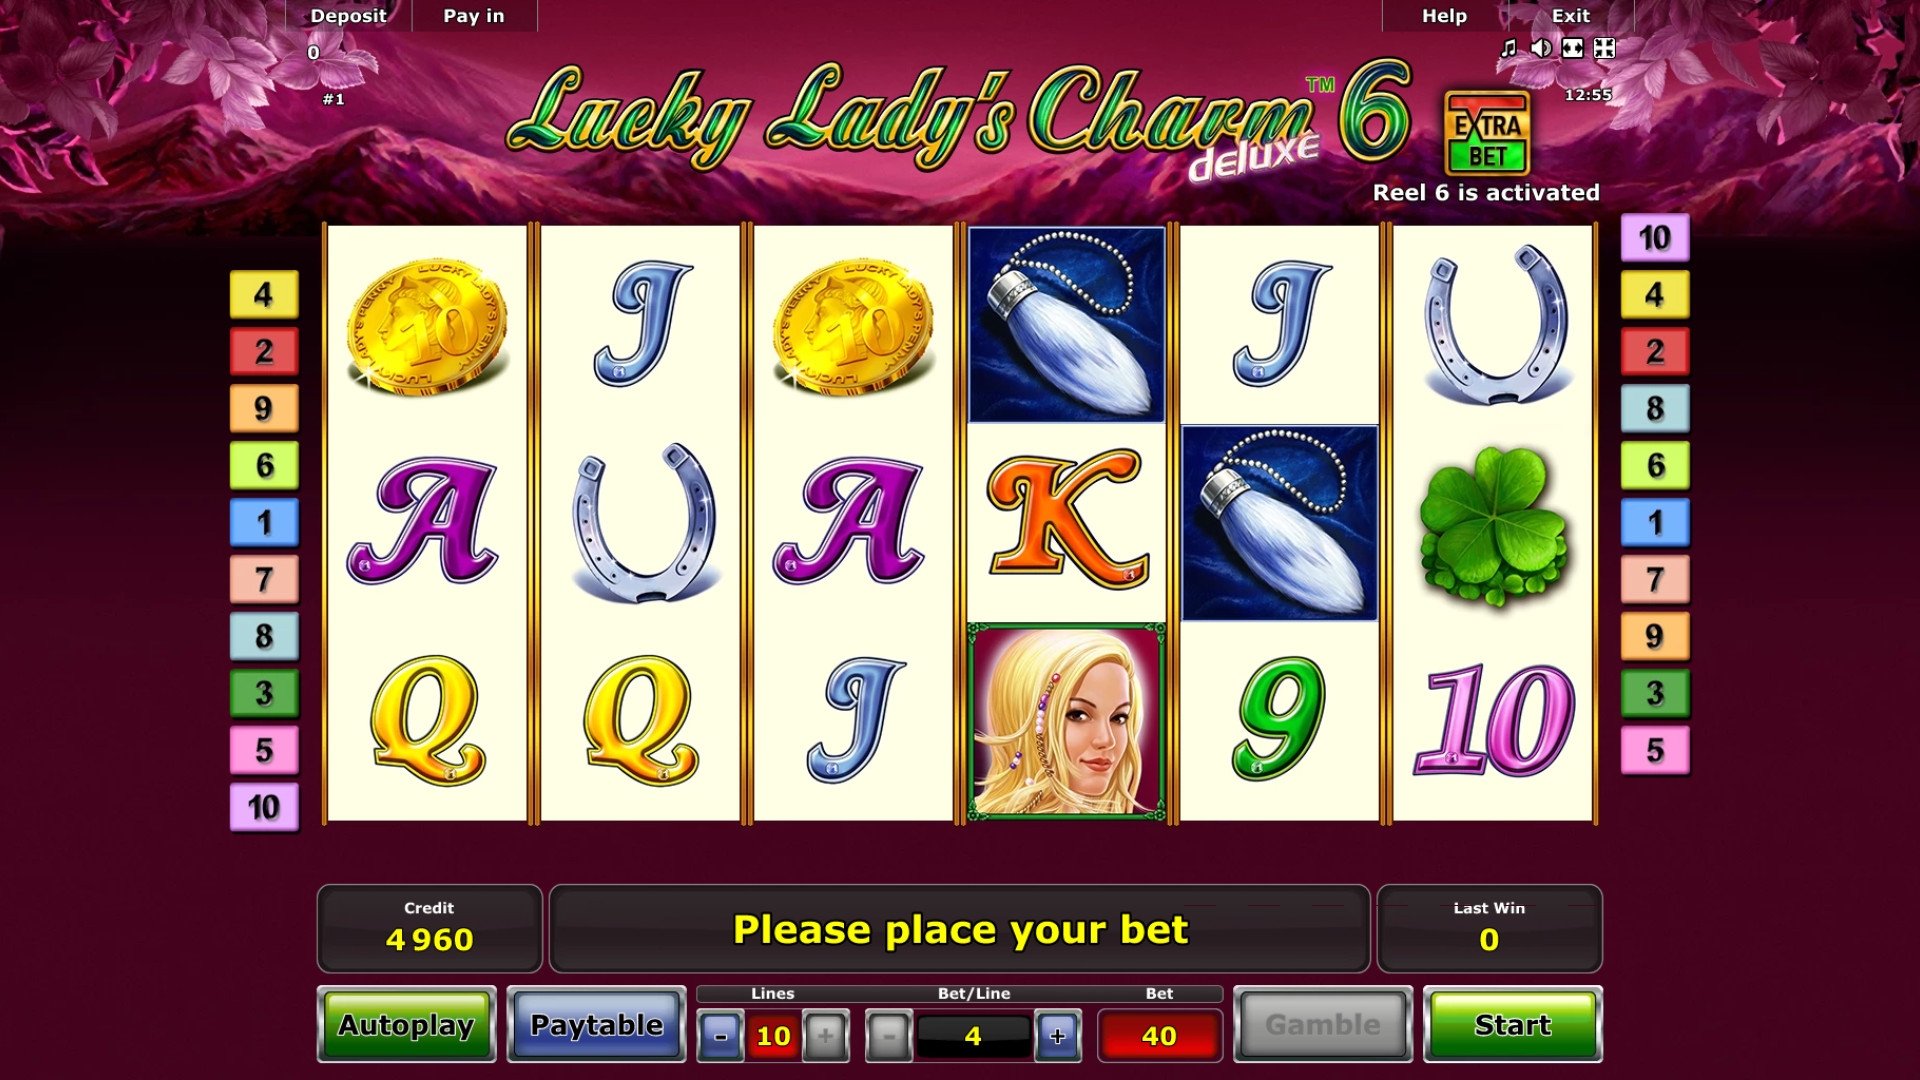 Lucky Ladyʼs Charm deluxe 6 Free Online Slots casino free play no deposit required 